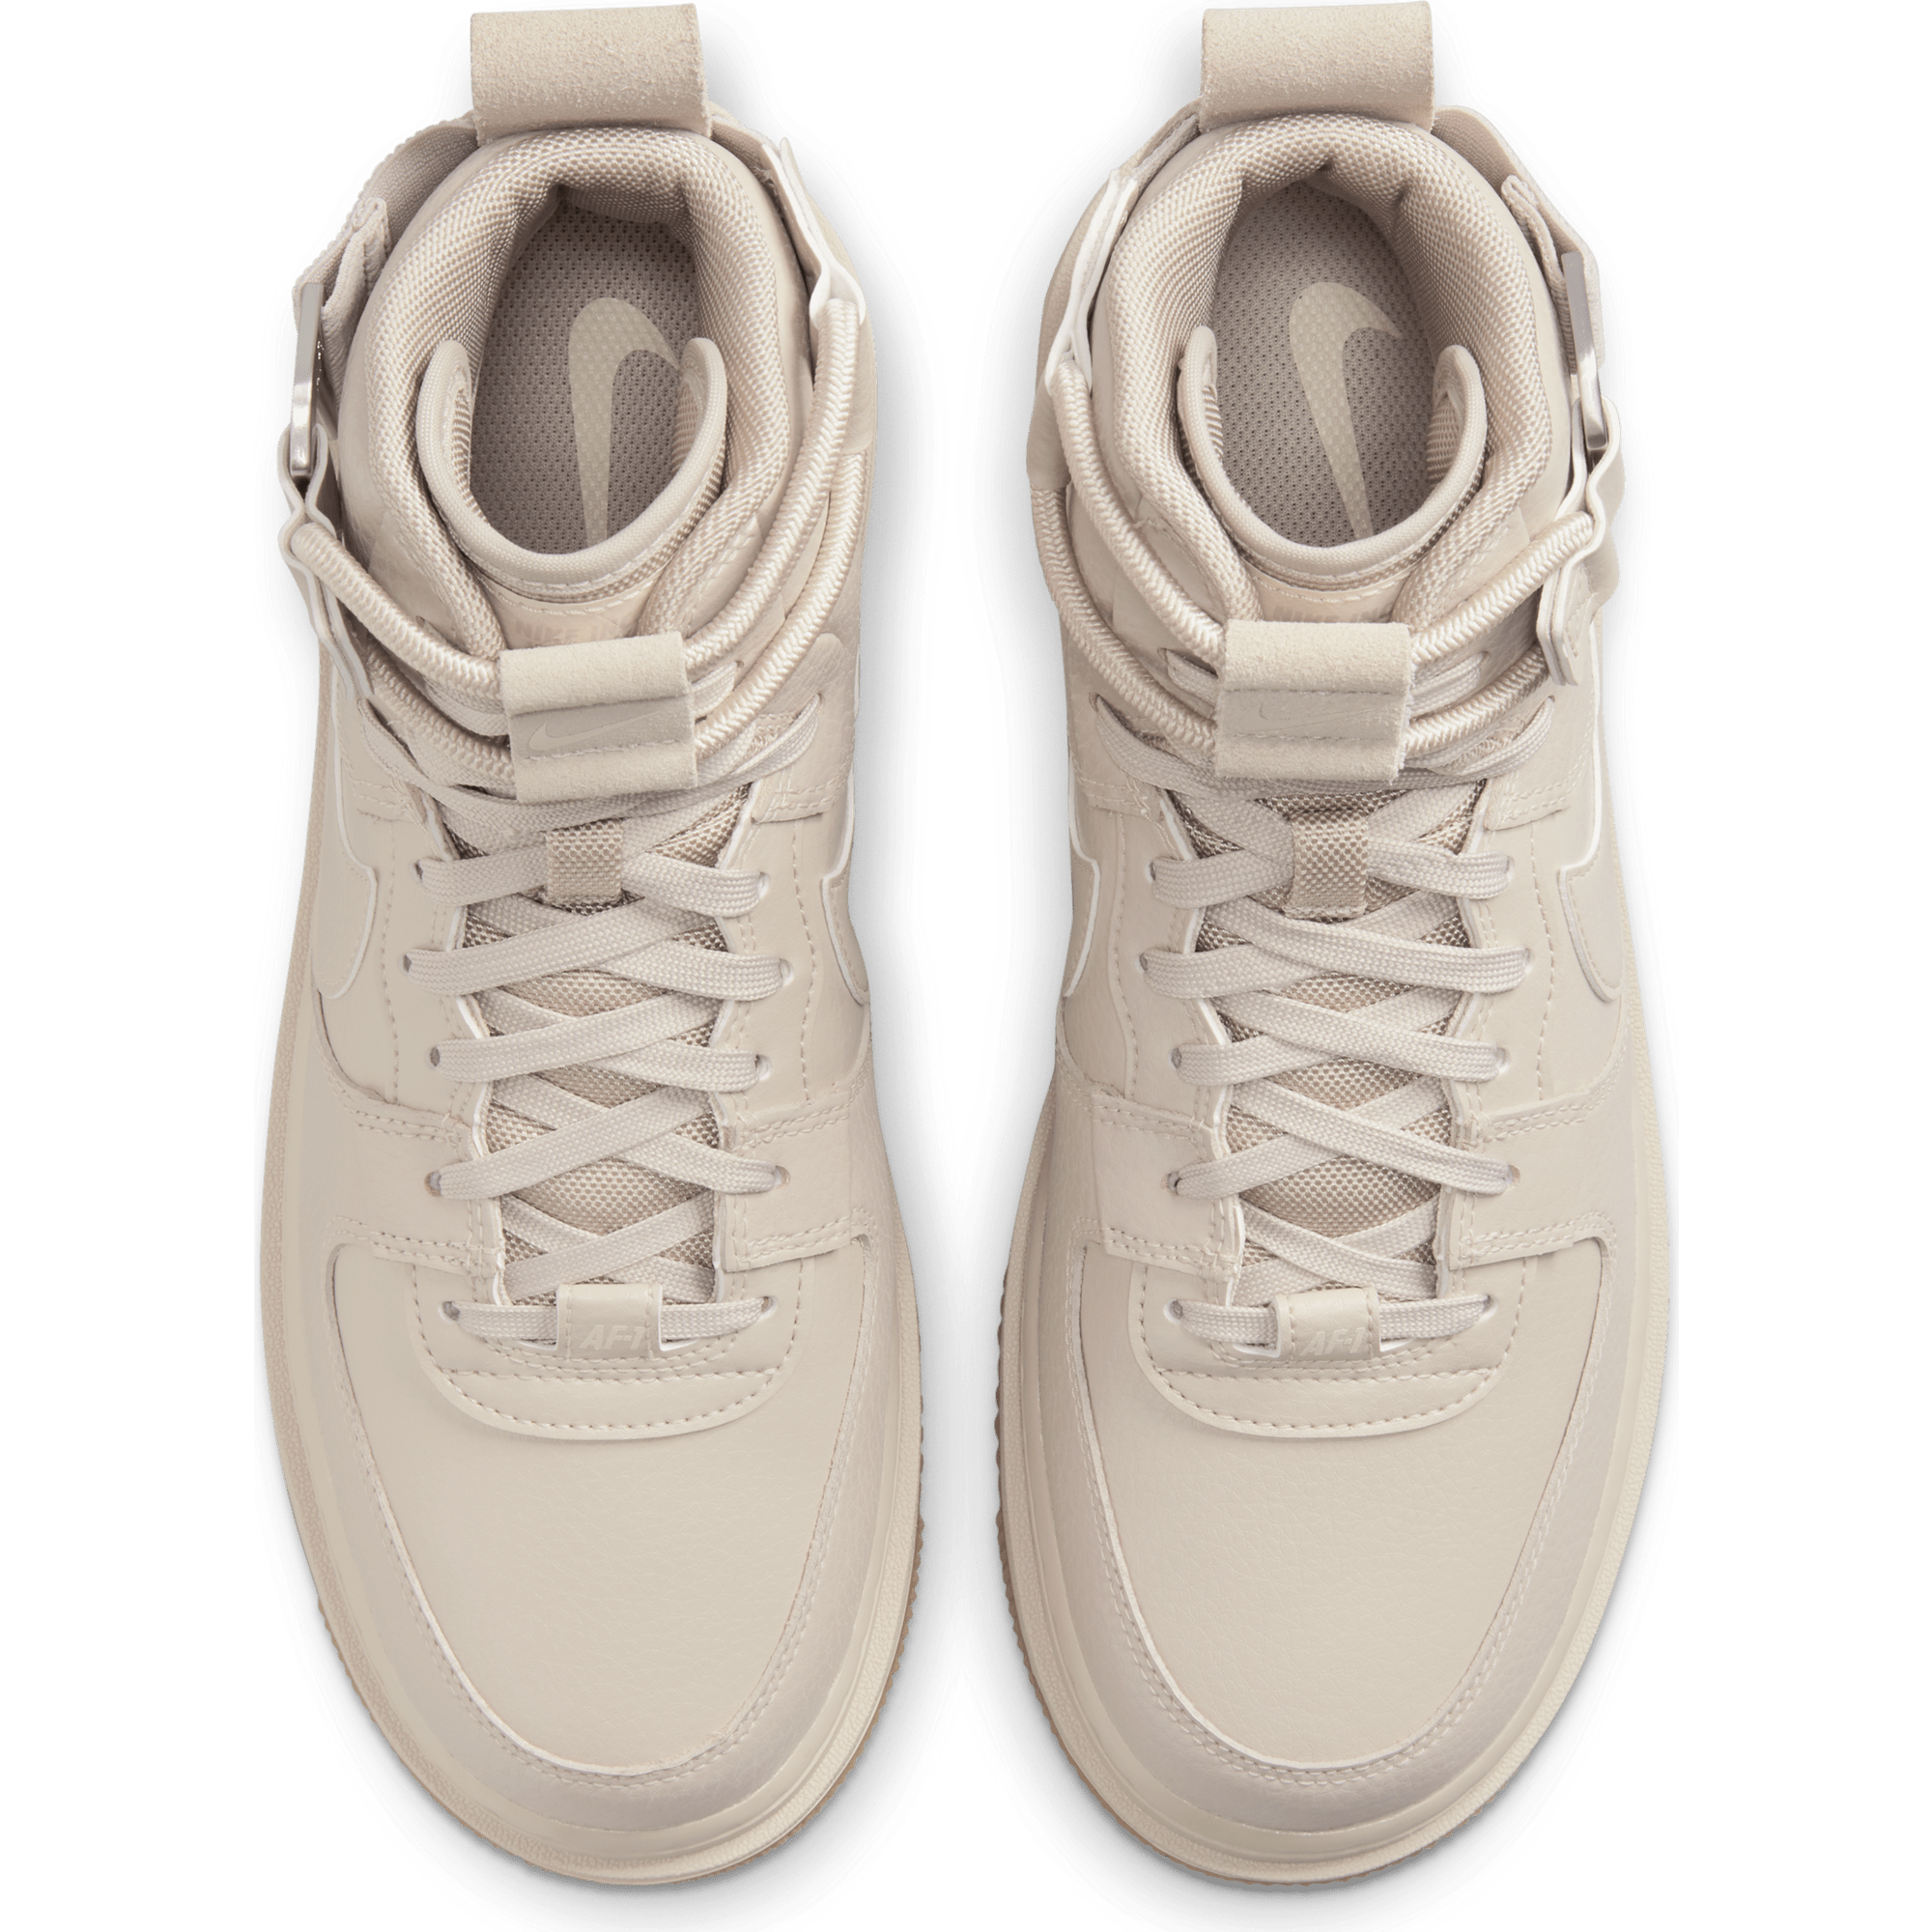 Nike Women's Air Force 1 High Utility 2.0 Boot High-Top Sneakers